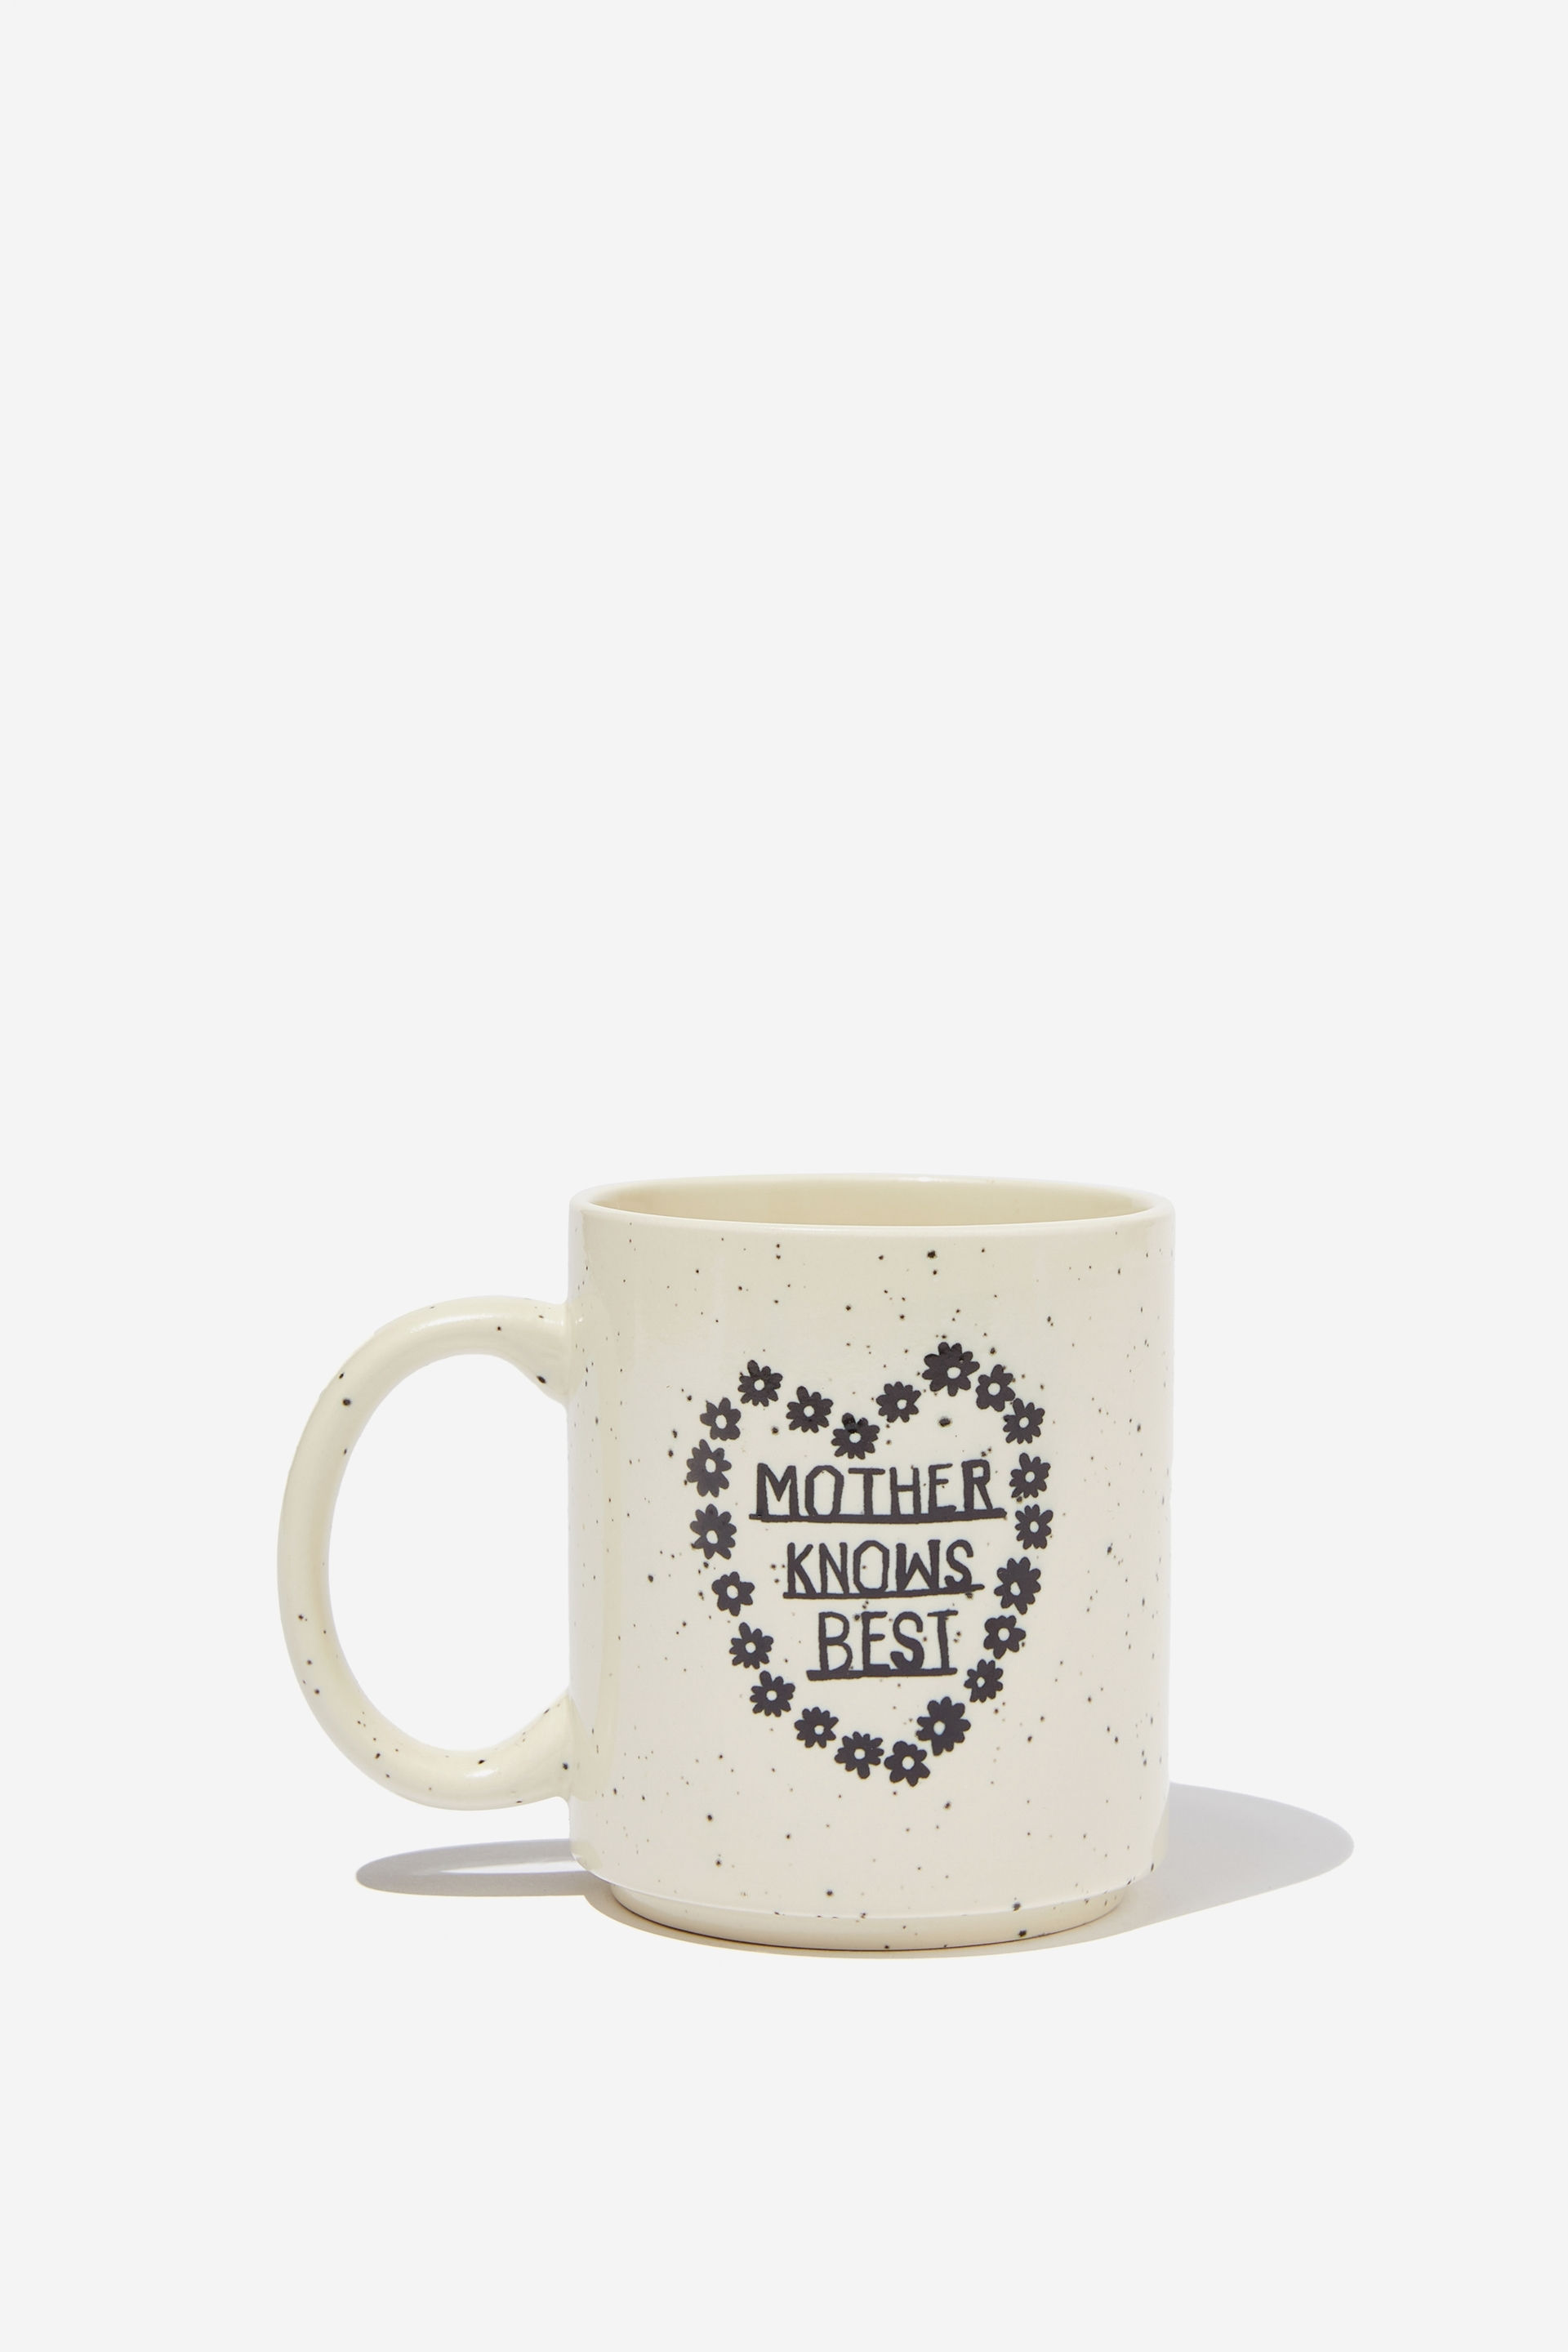 Typo - Limited Edition Mothers Day Mug - Mother knows best speckle